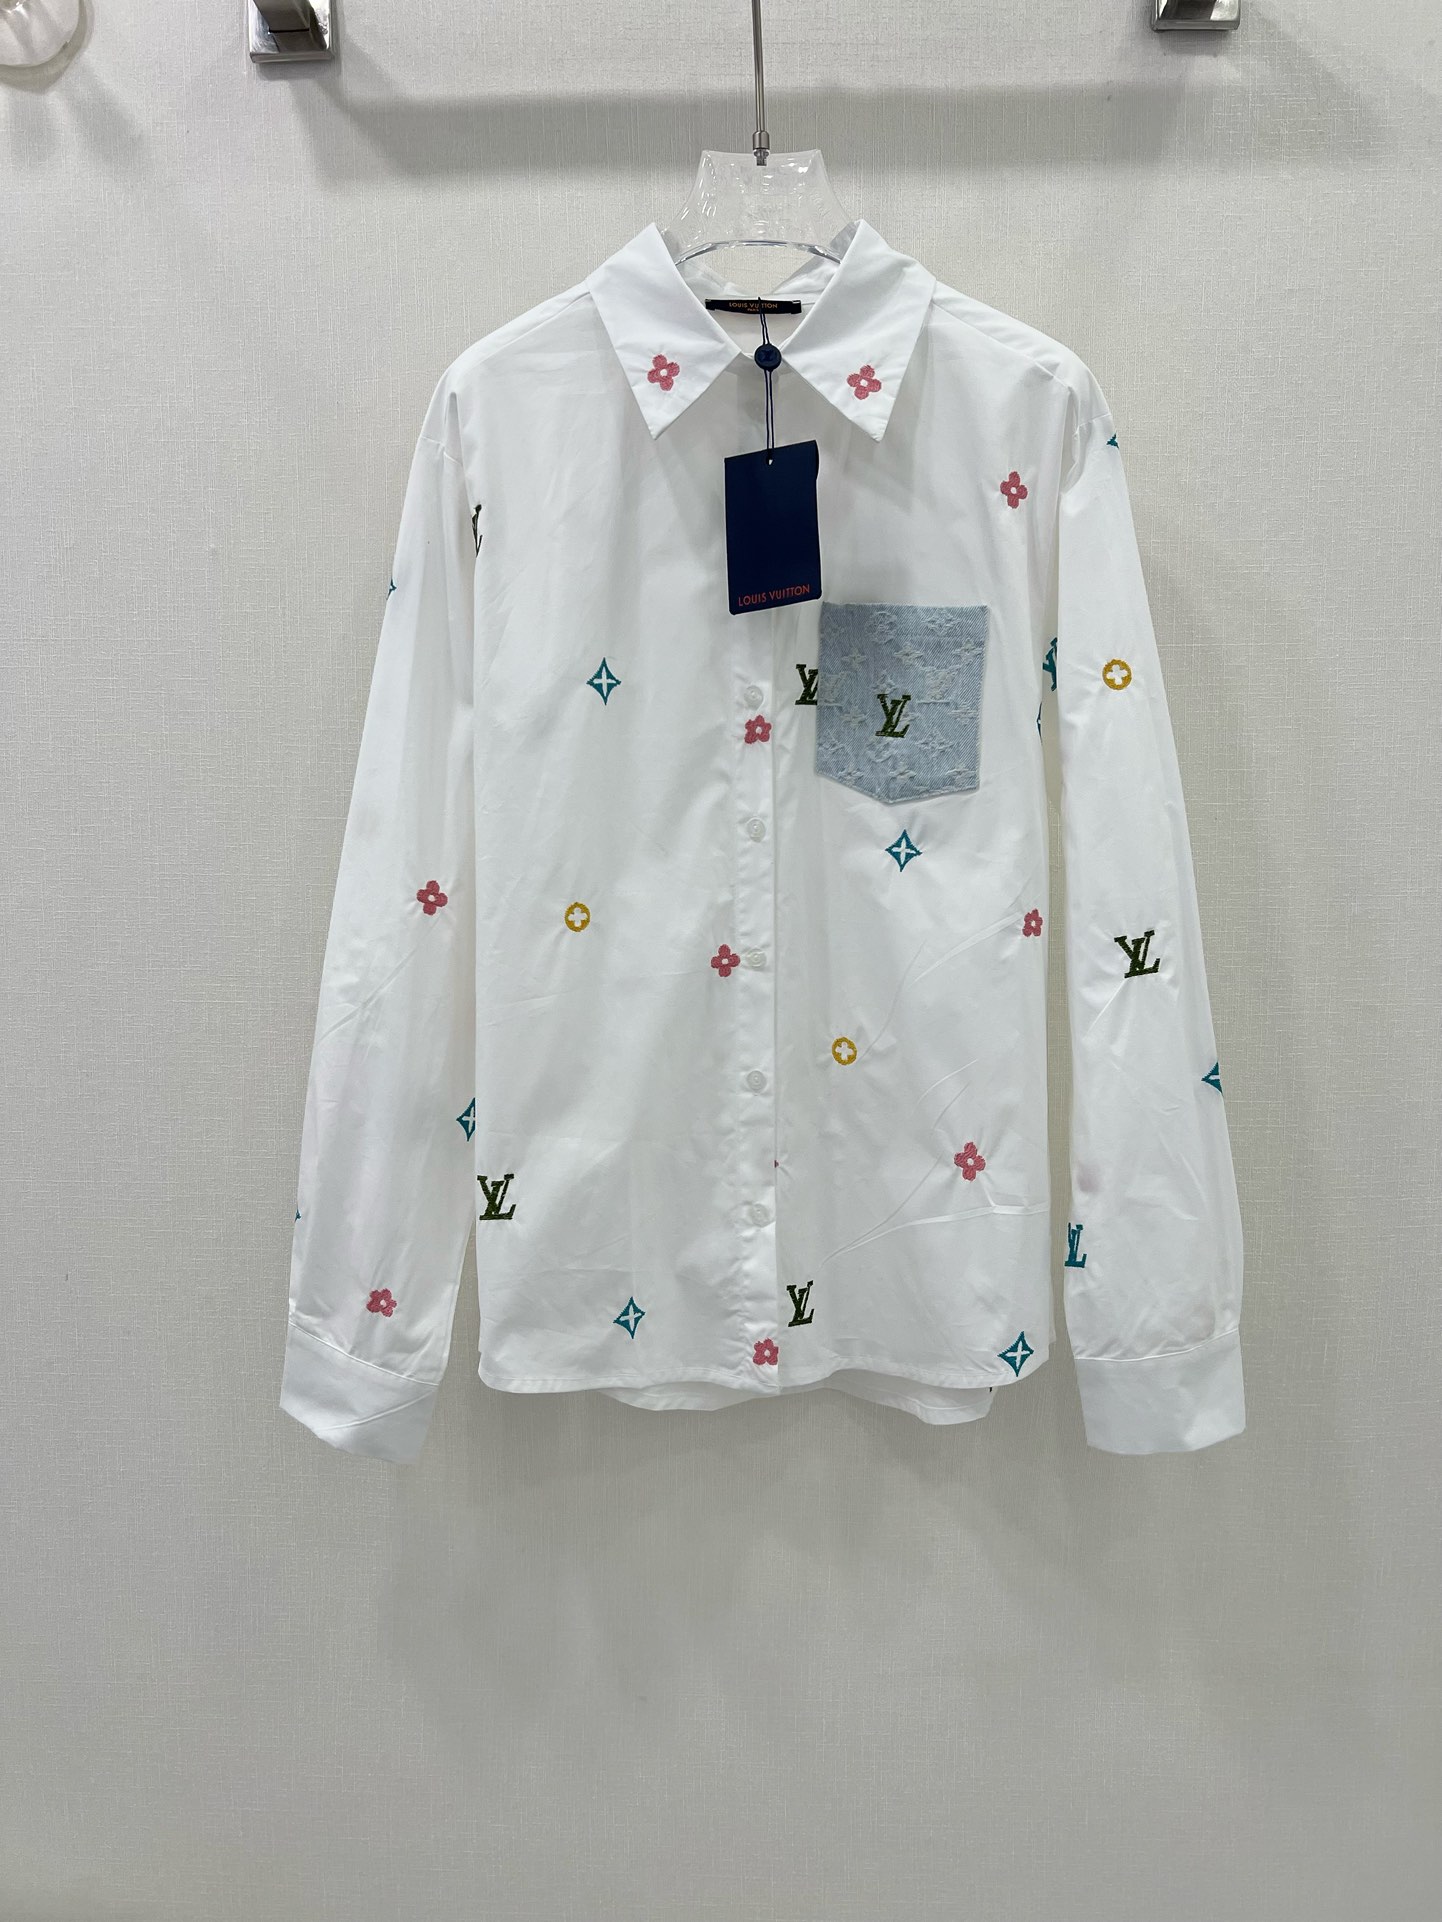 Louis Vuitton Clothing Shirts & Blouses Embroidery Denim Fashion Casual SMLB30510893140